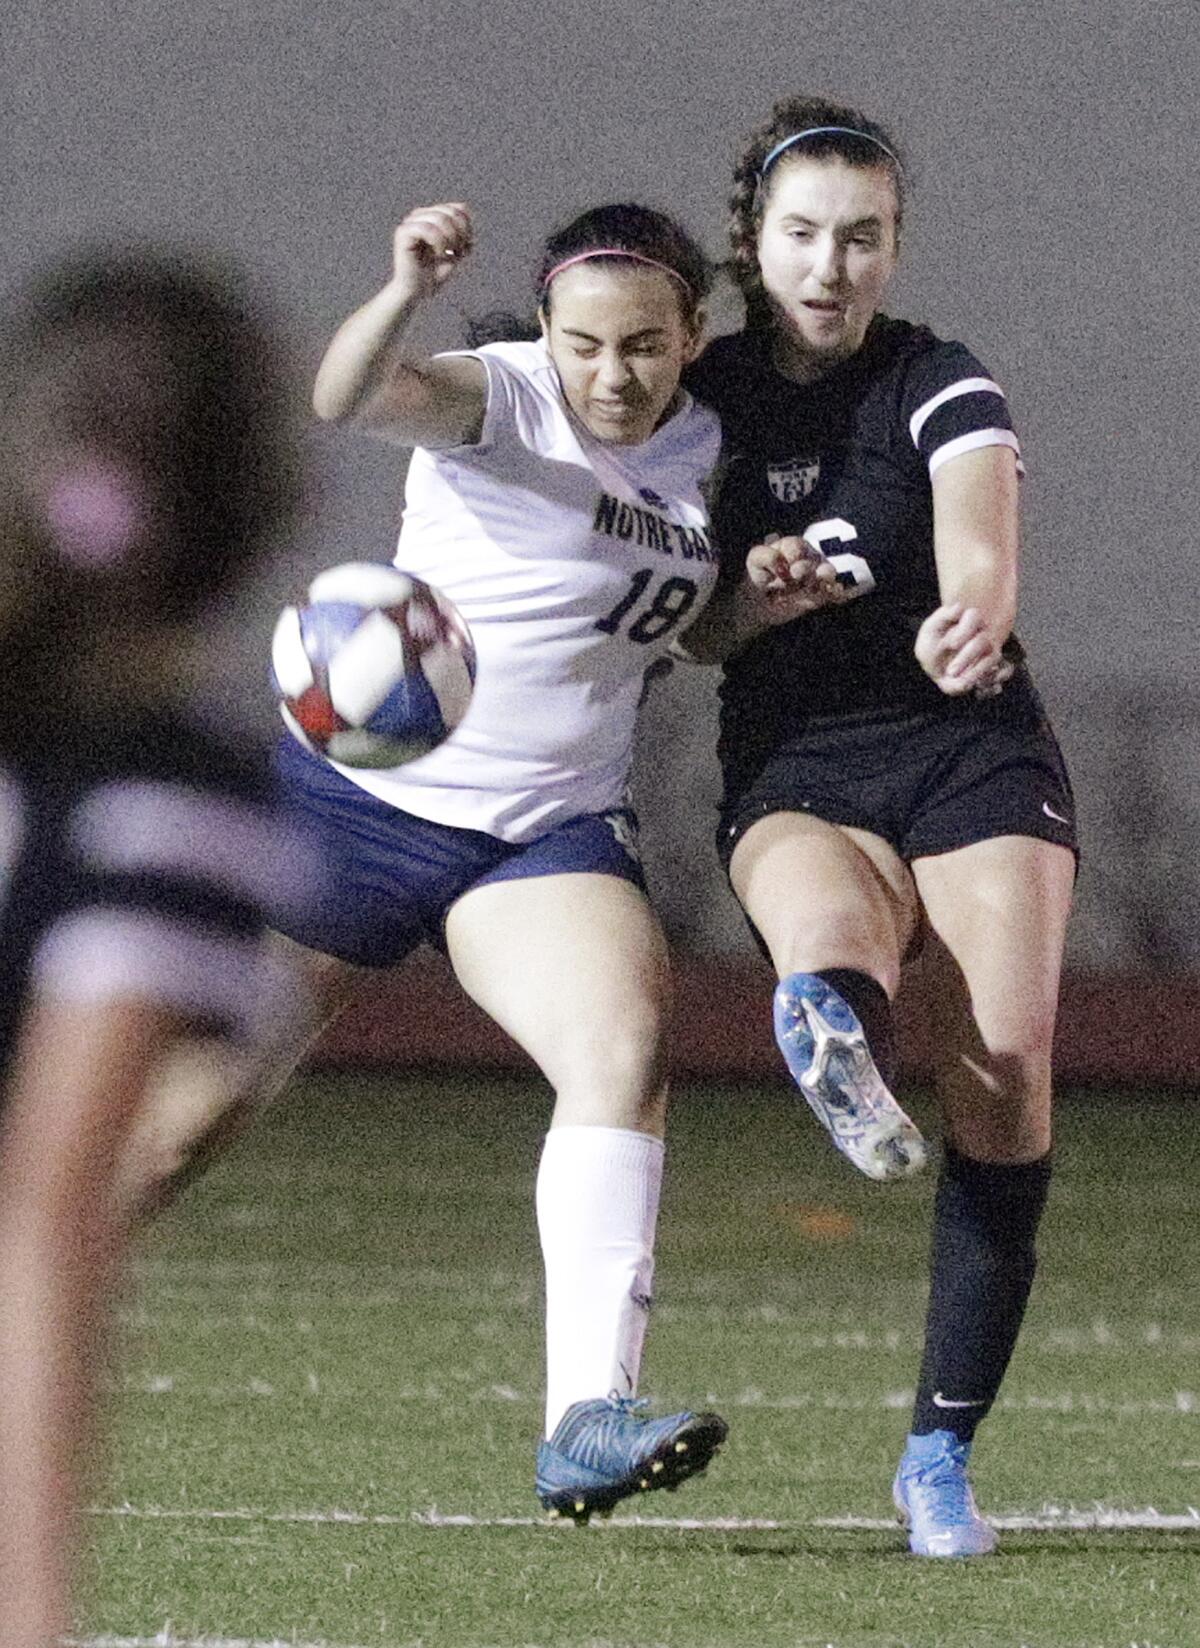 Sherman Oaks Notre Dame's Ashley Effatian leans into Flintridge Sacred Heart defender Allison Risha who clears the ball in a Mission League girls' soccer game at Occidental College in Los Angeles on Wednesday, January 8, 2020.